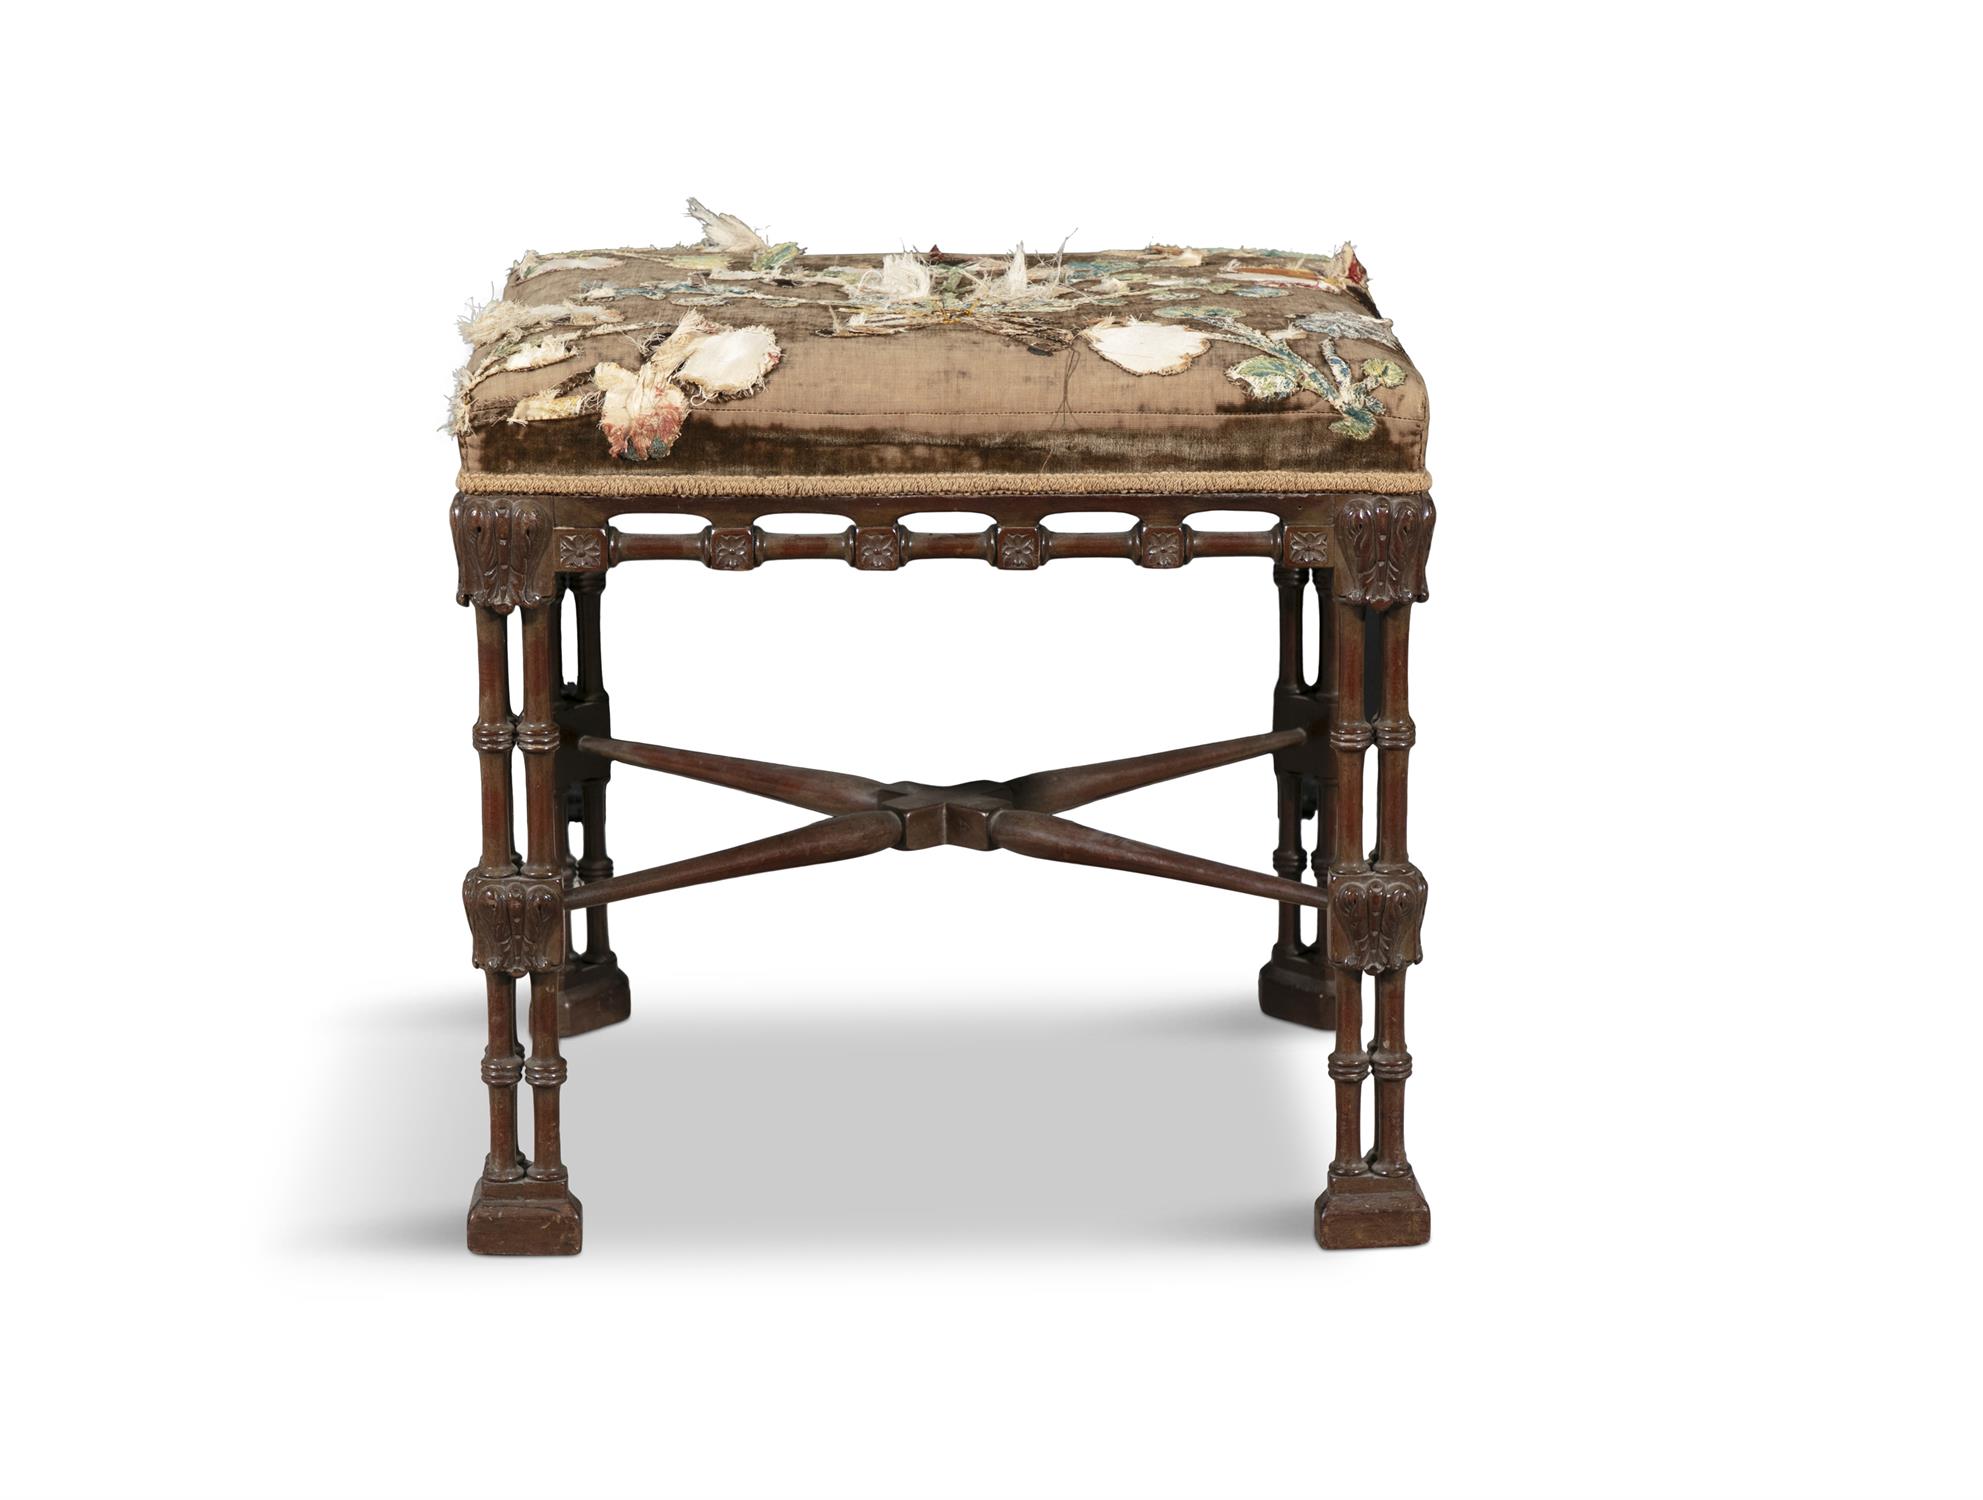 A "CHINESE CHIPPENDALE" UPHOLSTERED MAHOGANY STOOL, 19TH CENTURY with intricately carved